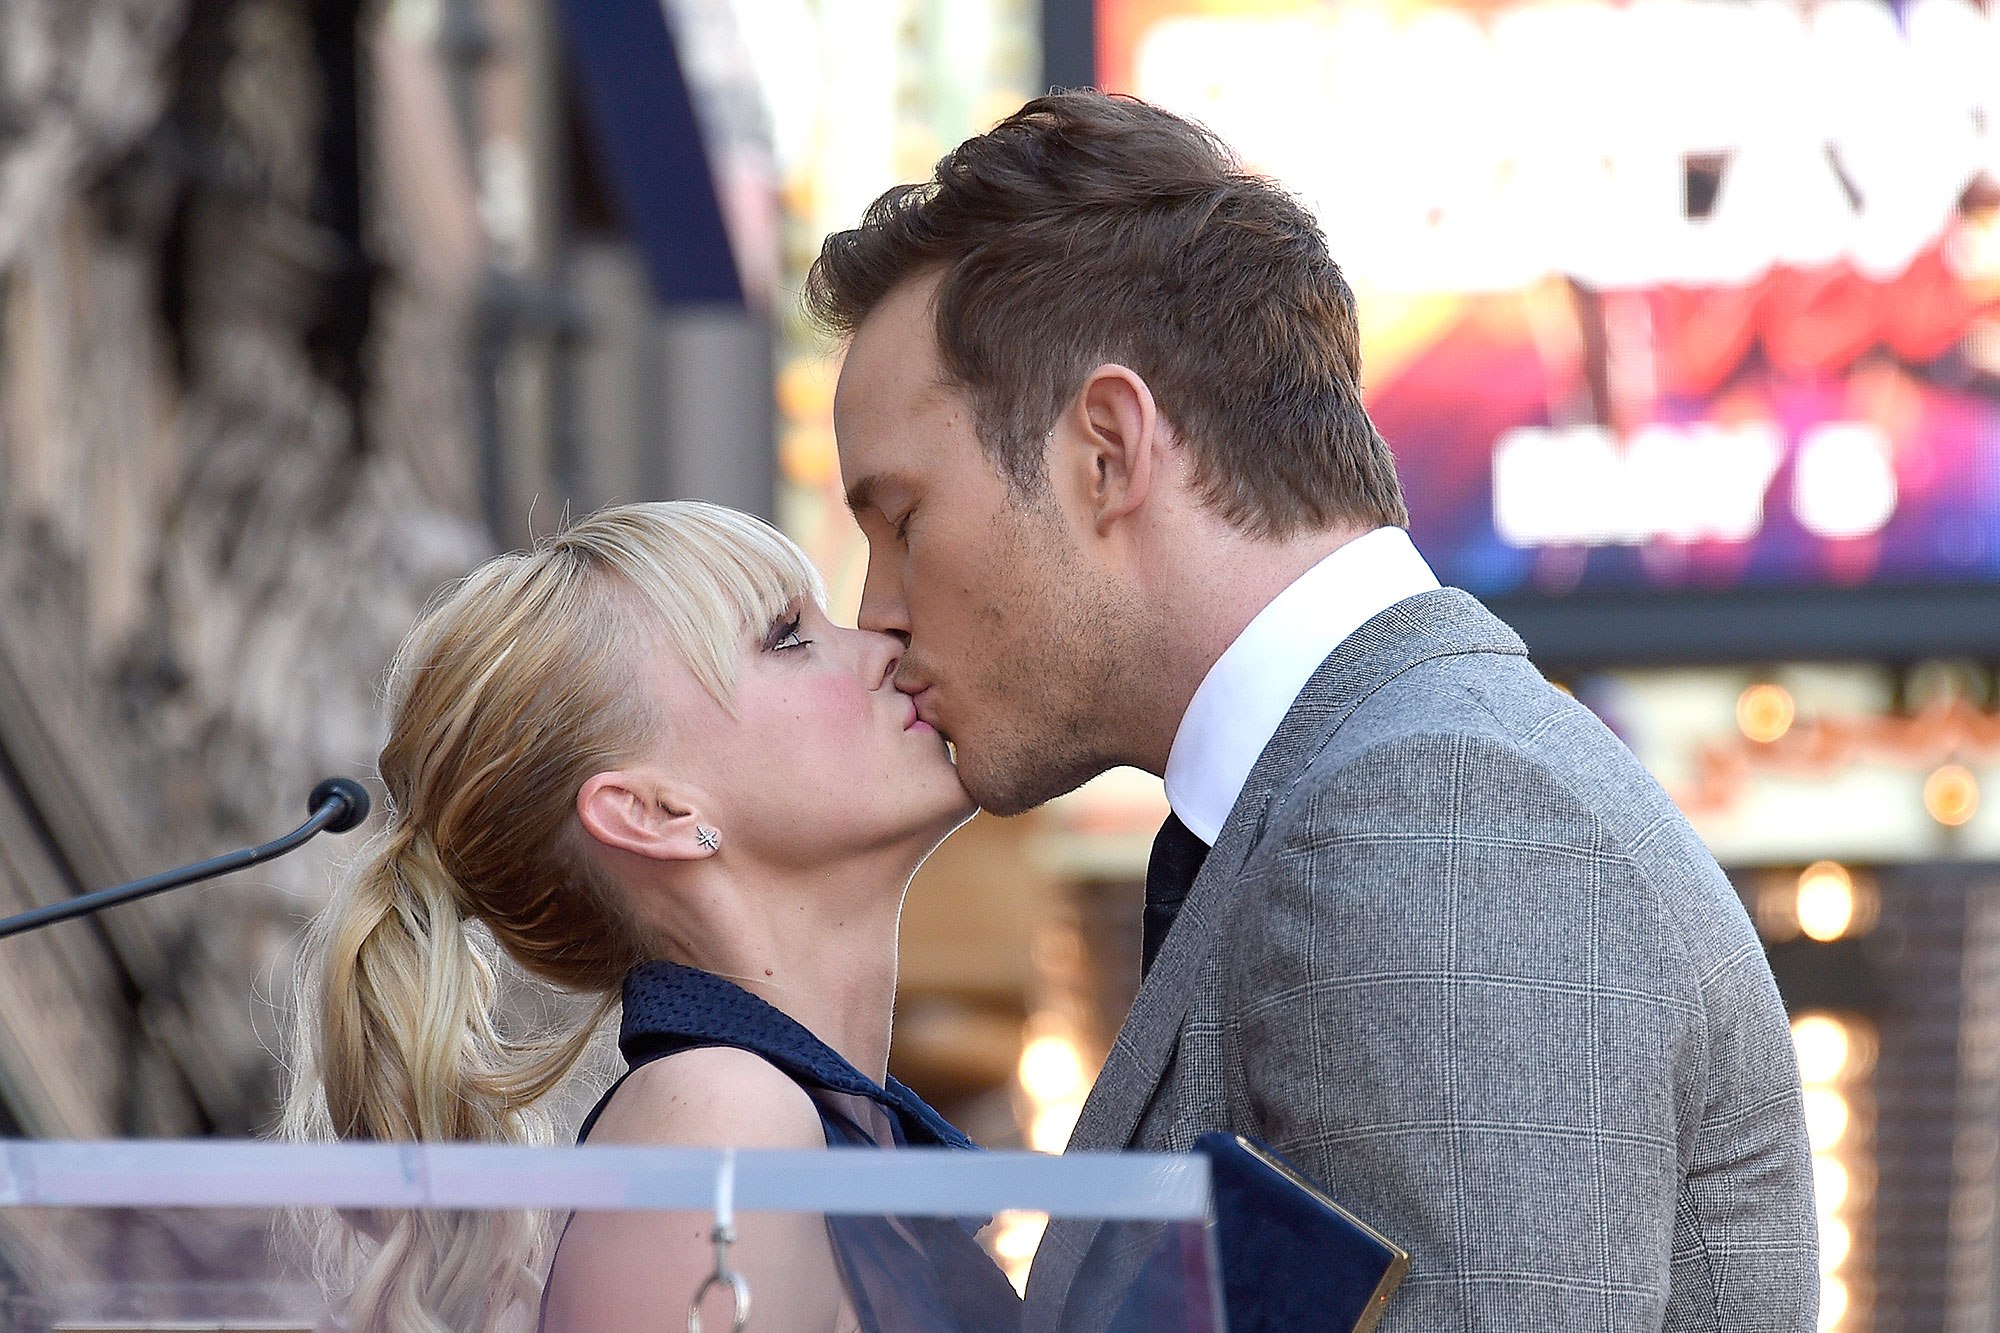 Chris Pratt Thanks Wife Anna Faris in Emotional Hollywood Walk of Fame Speech: ‘You Have My Heart’